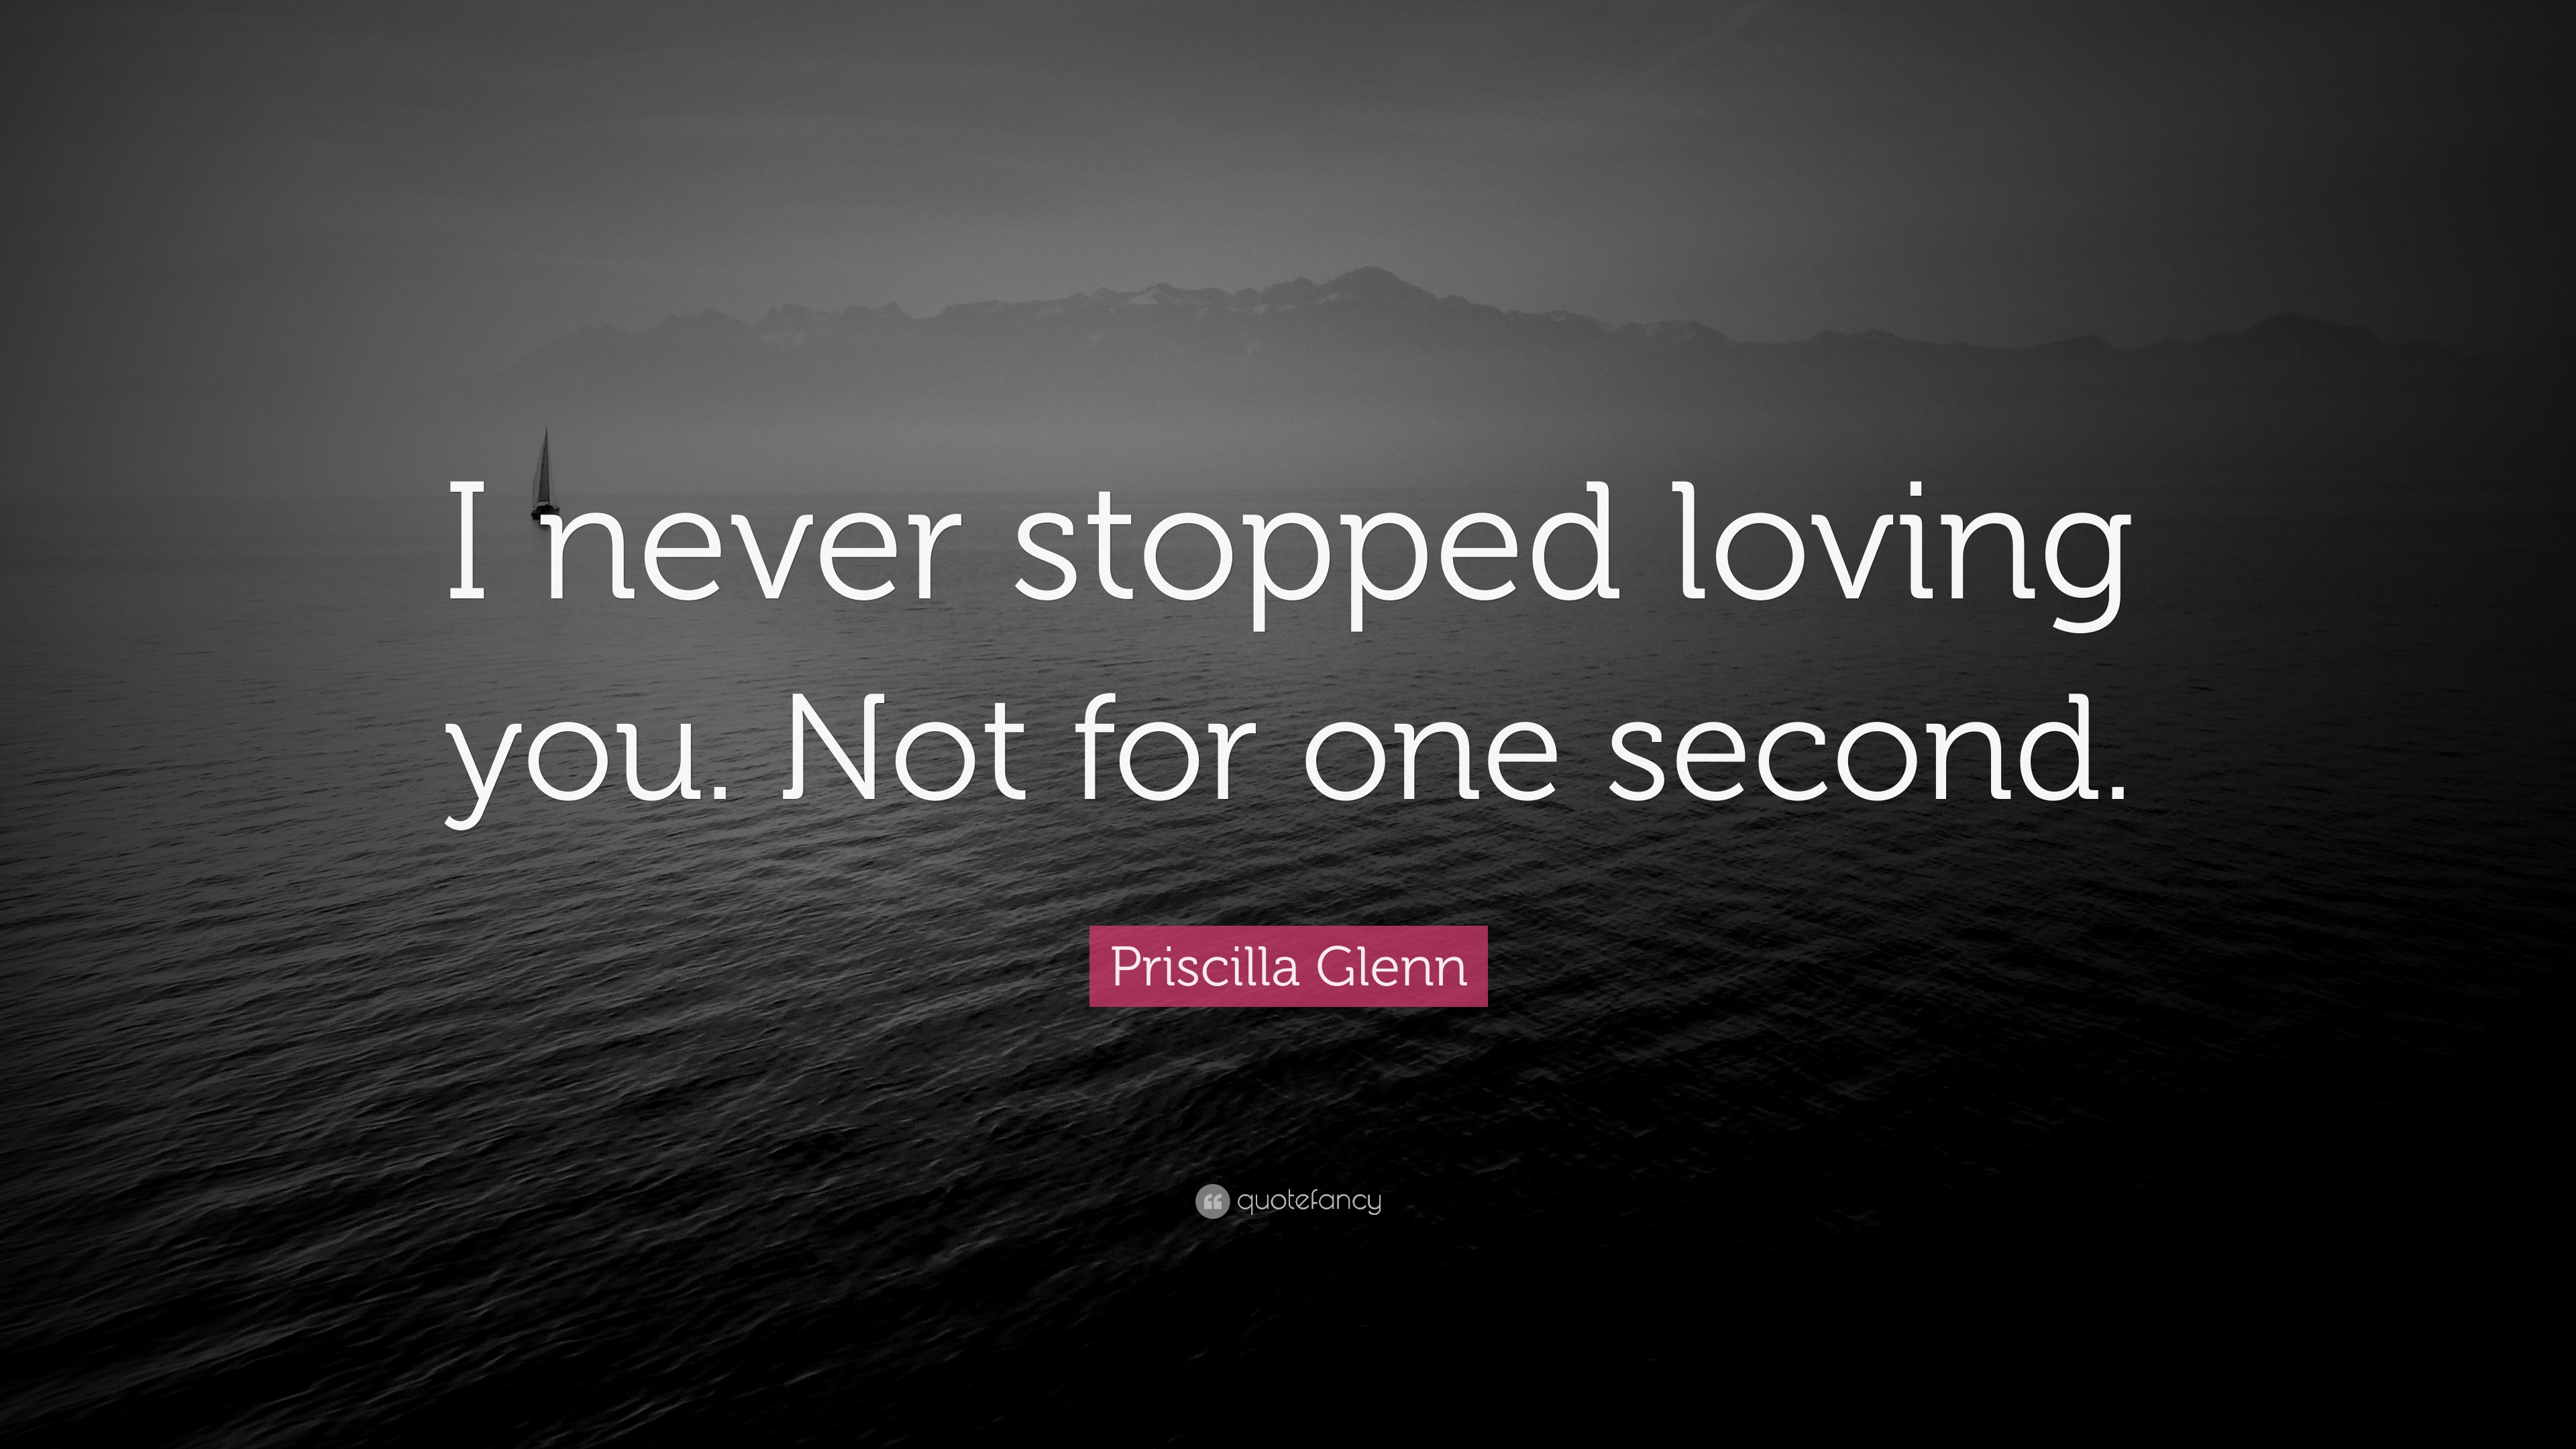 Priscilla Glenn Quote “I never stopped loving you Not for one second